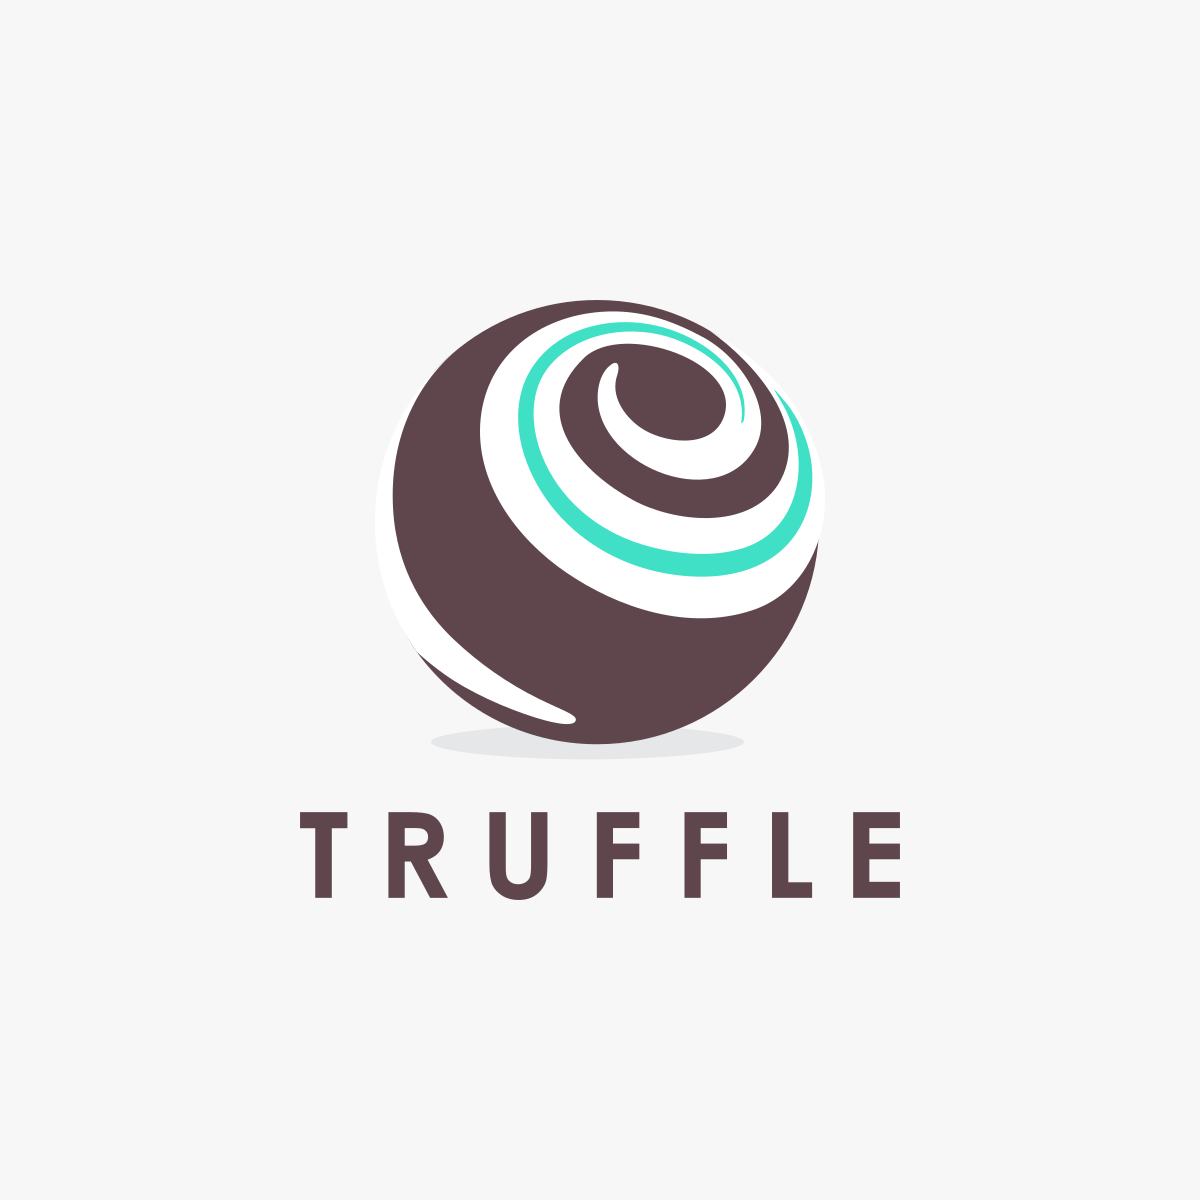 Truffle Community Updates - Introducing Github Discussions!